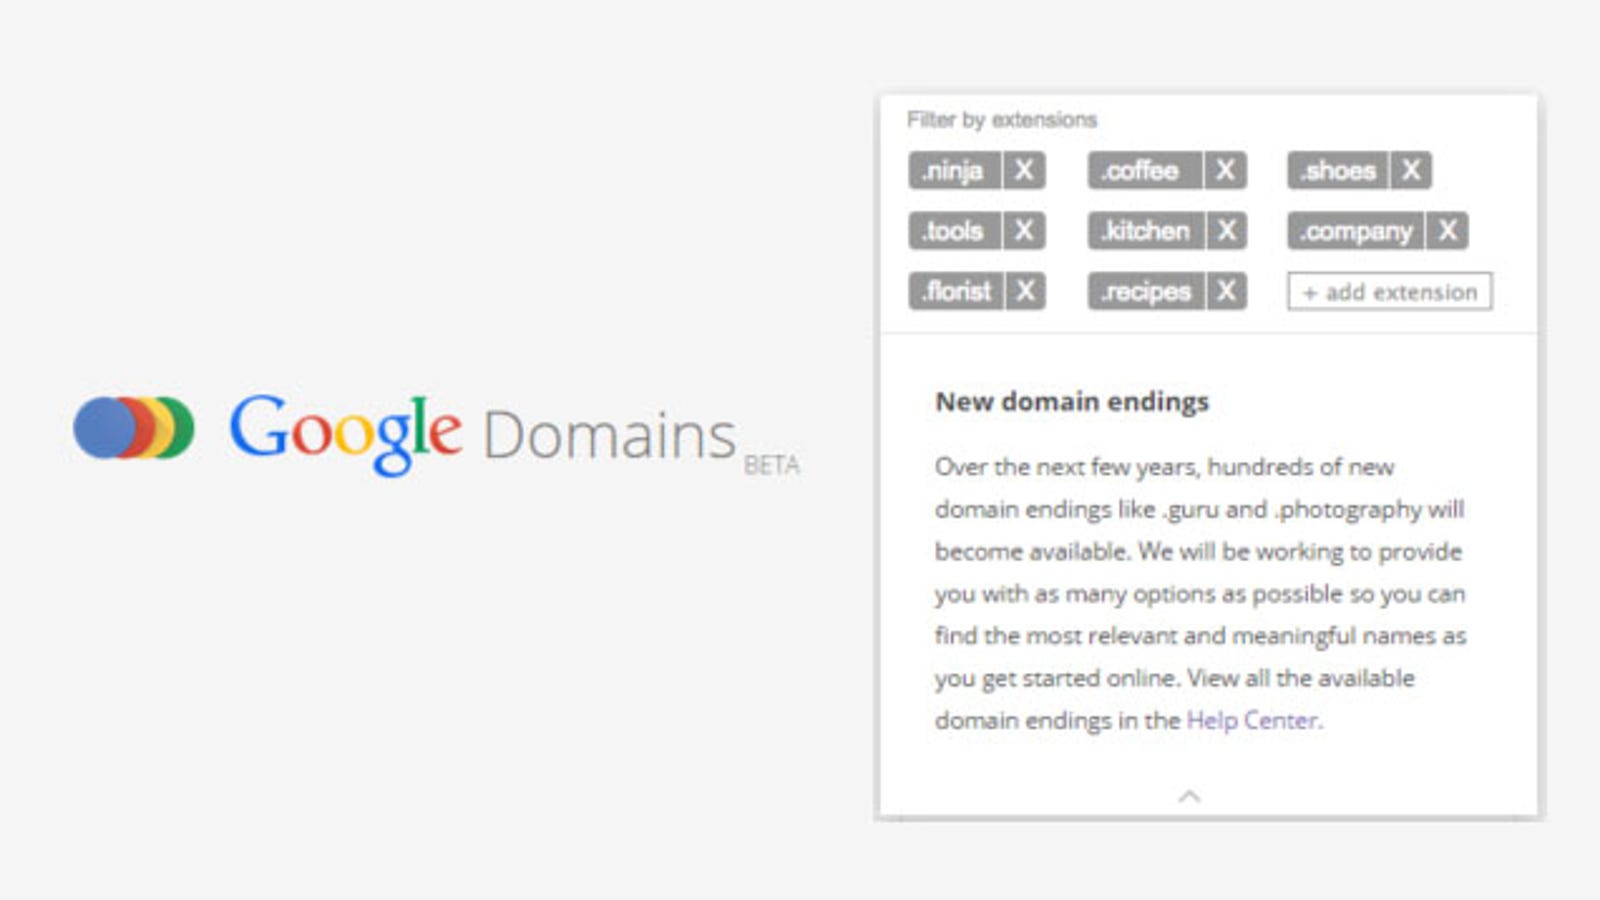 You Can Now Buy and Sell Domain Names on Google Domains